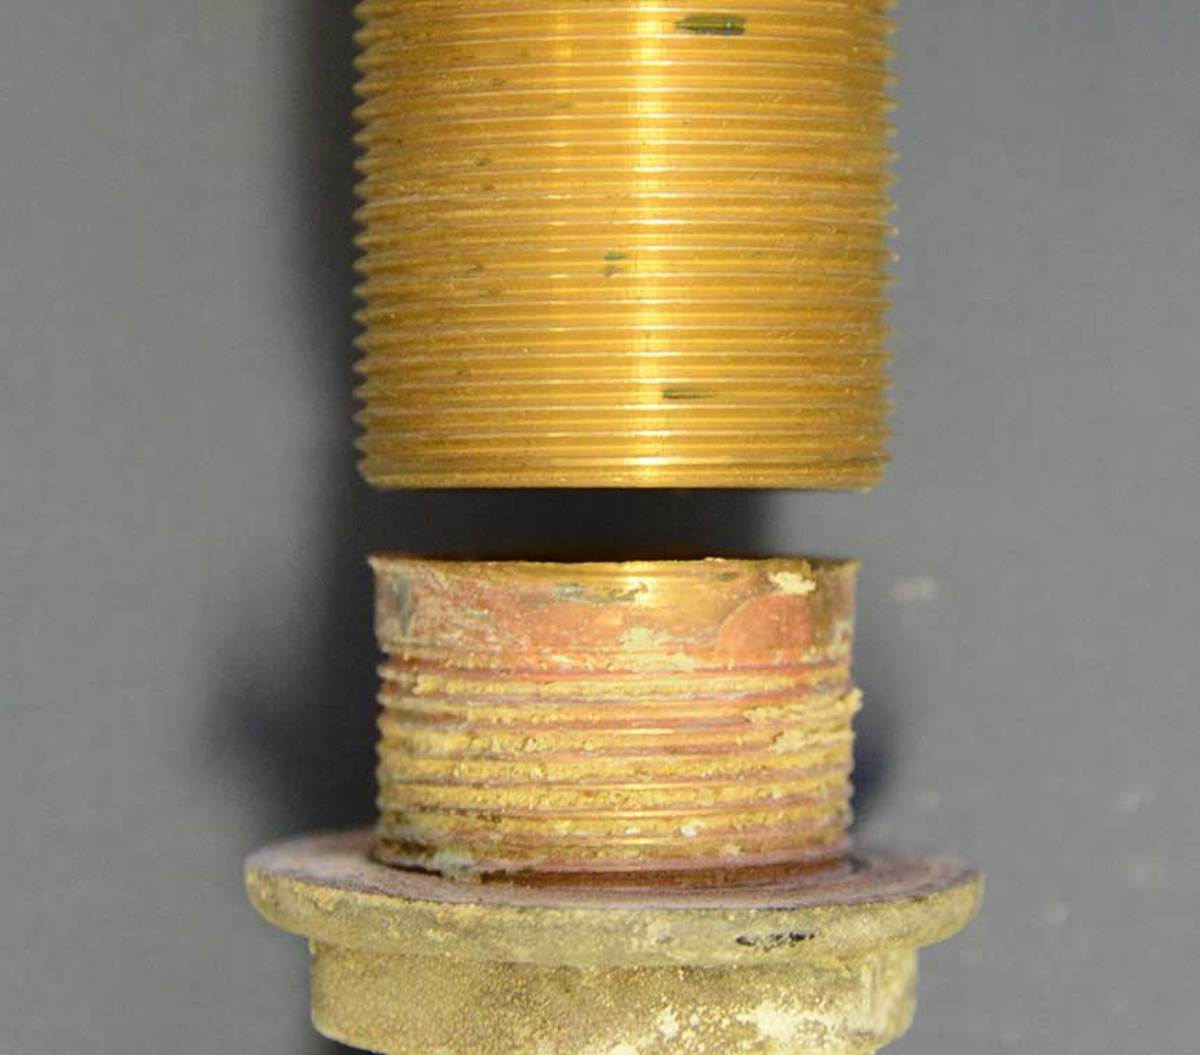 The color should be gold. The thru-hull on the right suffers from galvanic corrosion, as indicated by the pink color on the lower portion of the fitting.